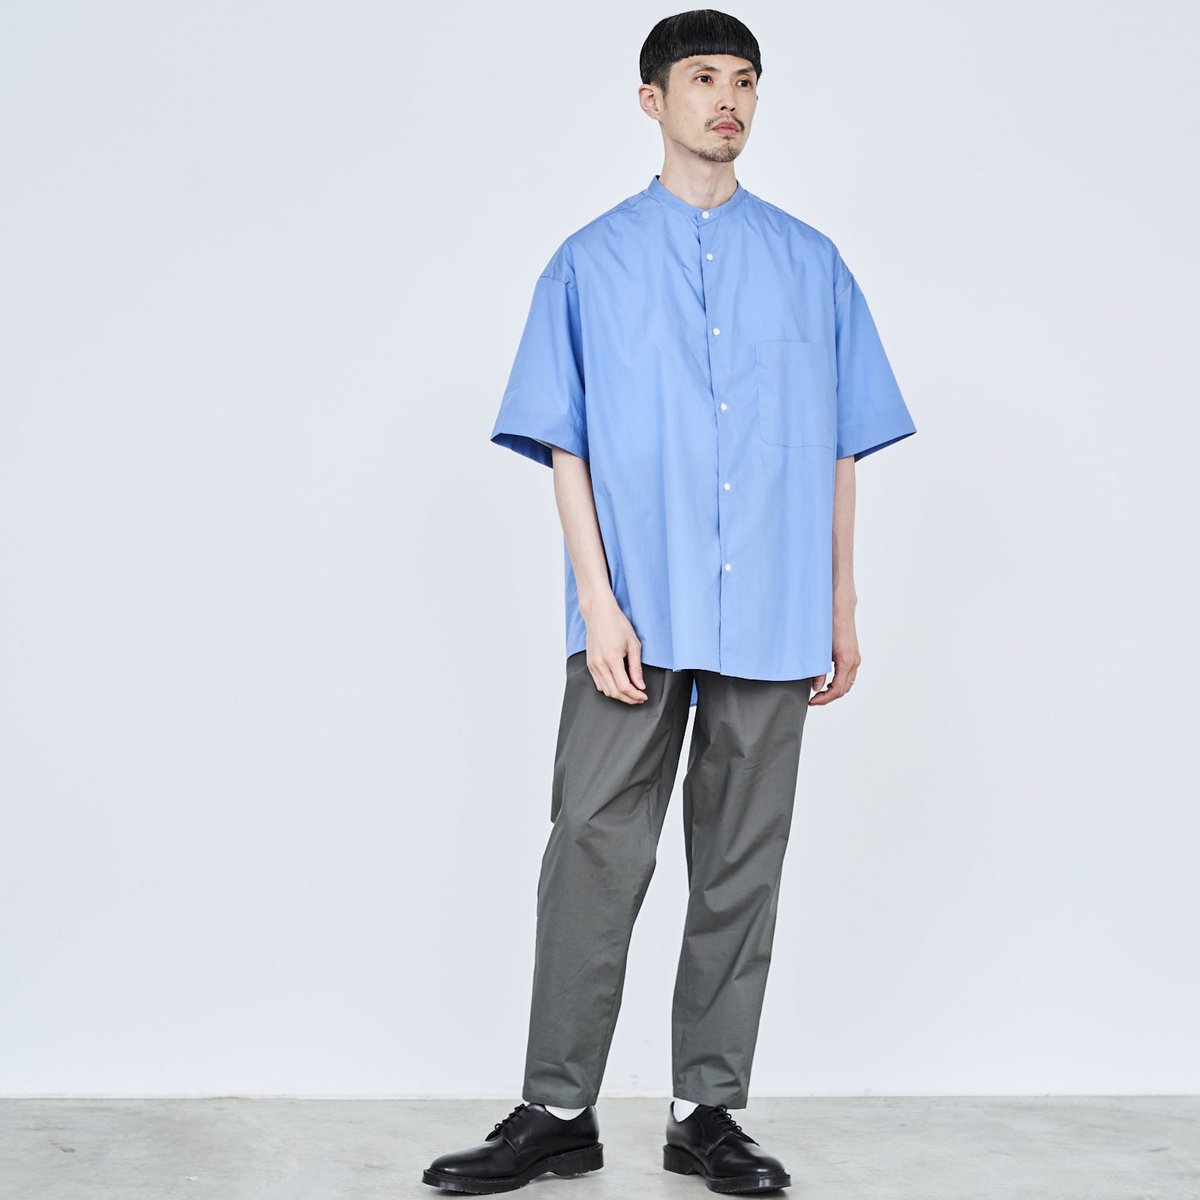 Broad S/S Oversized Band Collar Shirt | www.darquer.fr